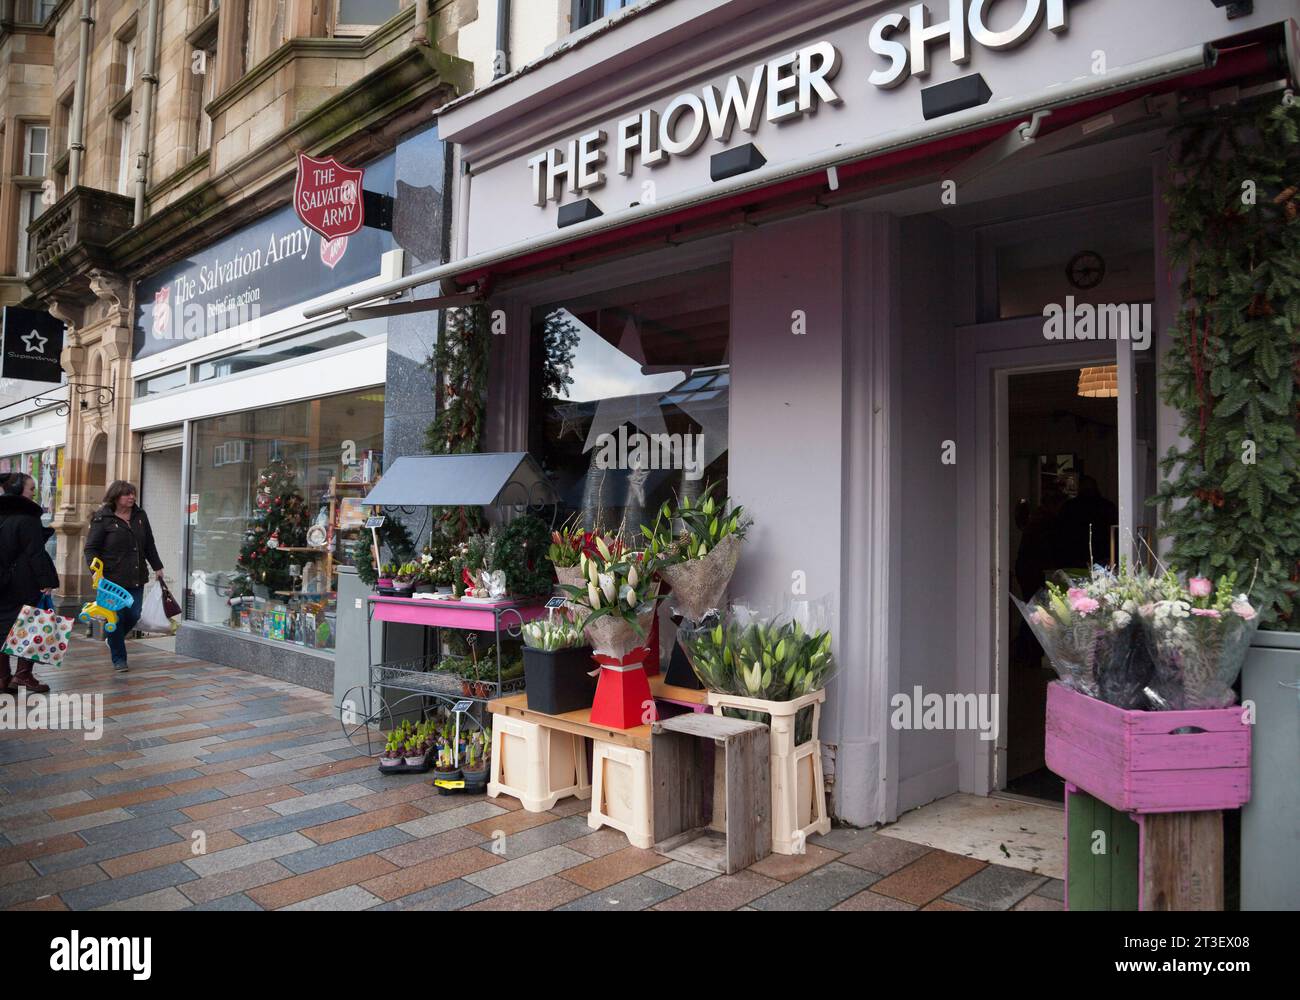 The Flower Shop, West Princes Street, Helensburgh Stock Photo